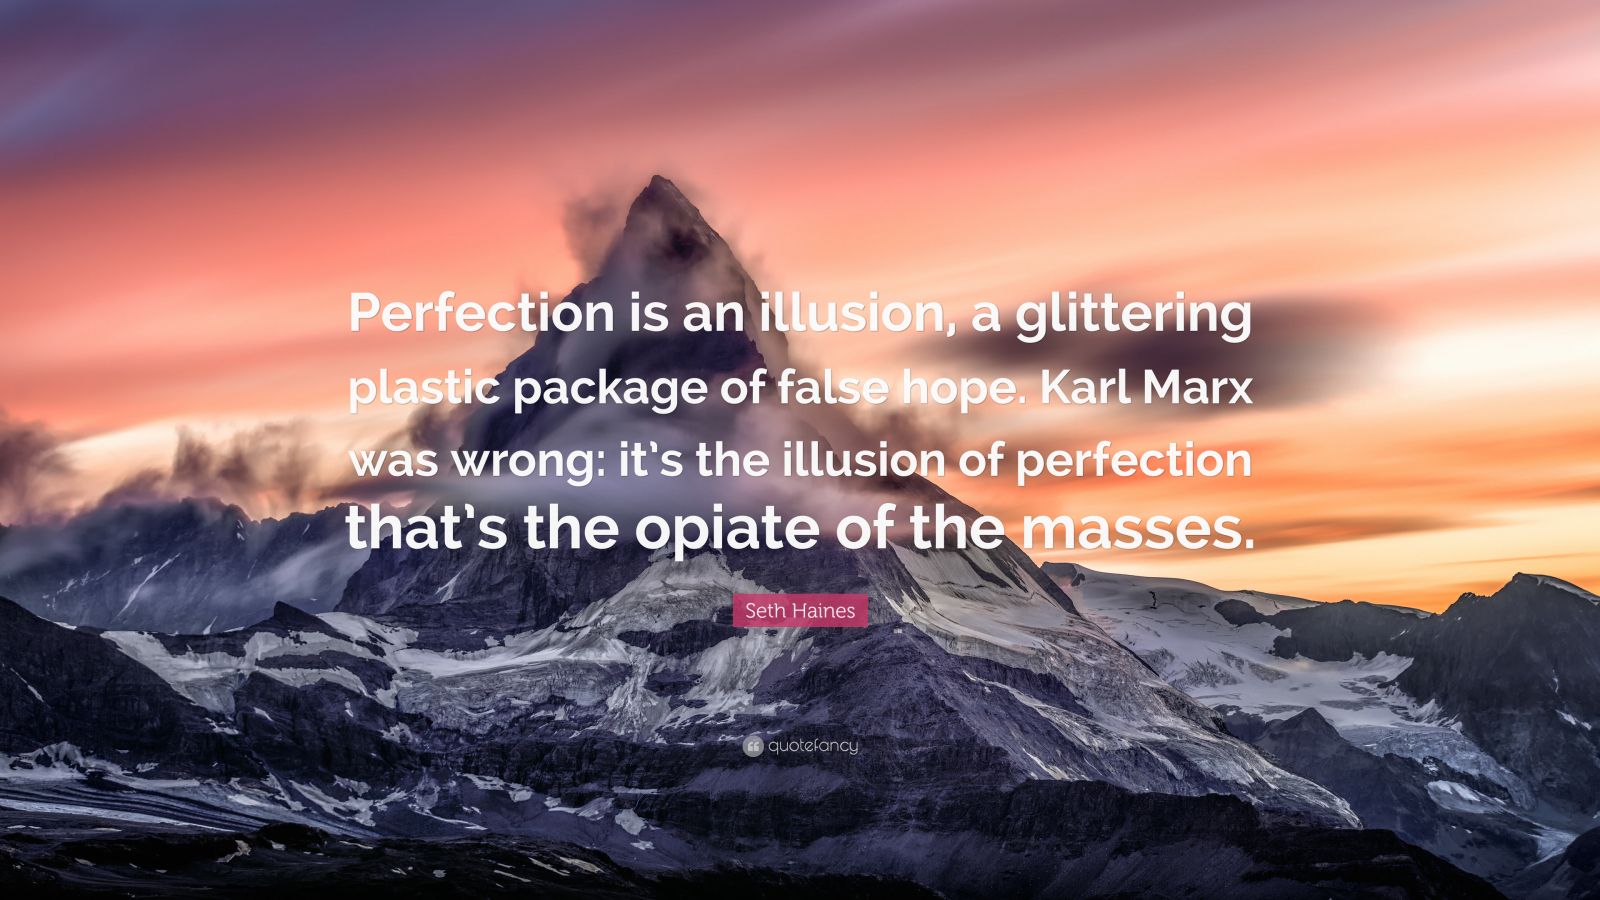 Seth Haines Quote: “Perfection is an illusion, a glittering plastic ...